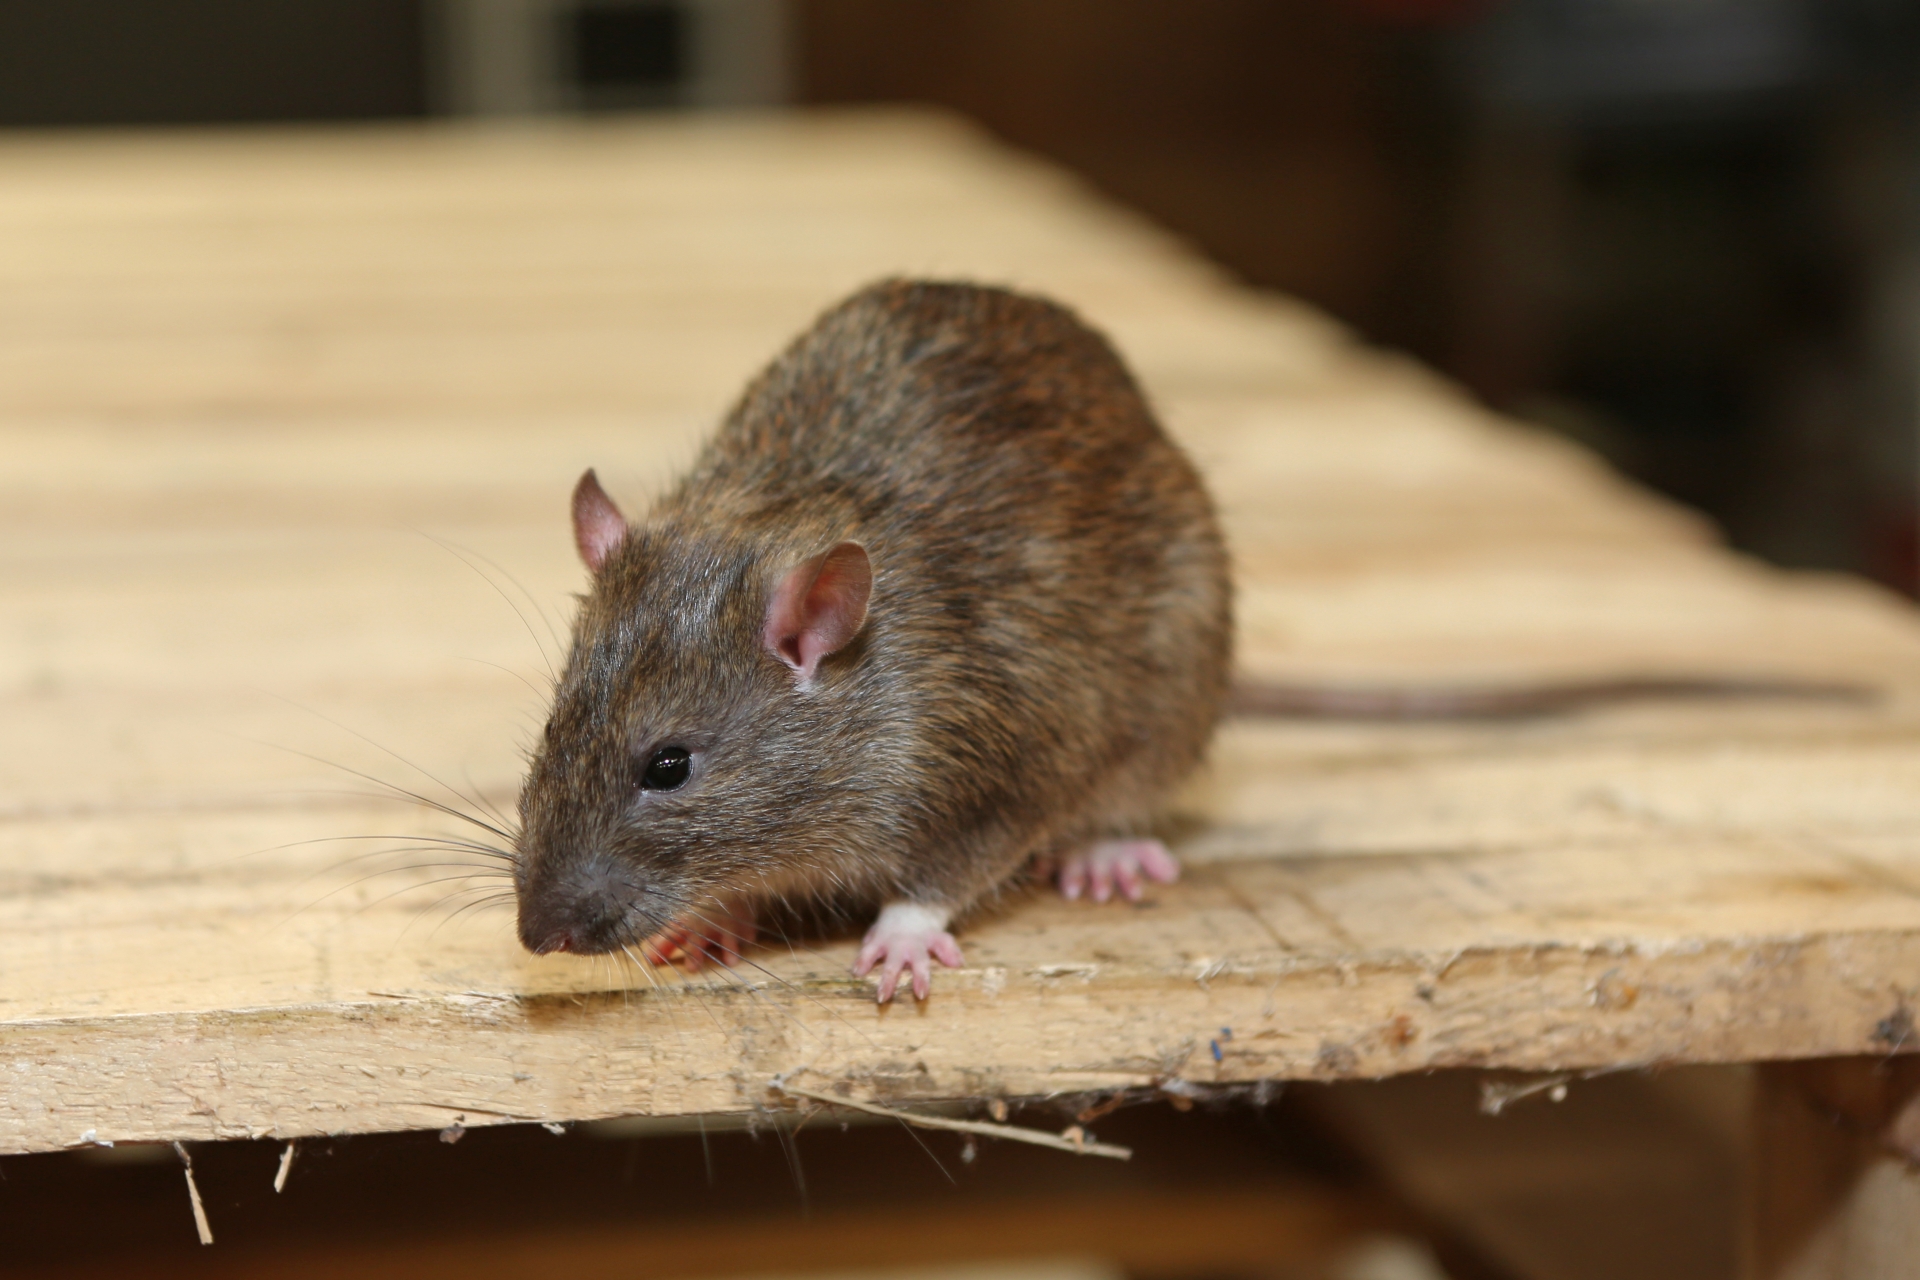 Rat Control, Pest Control in Abbey Wood, SE2. Call Now 020 8166 9746